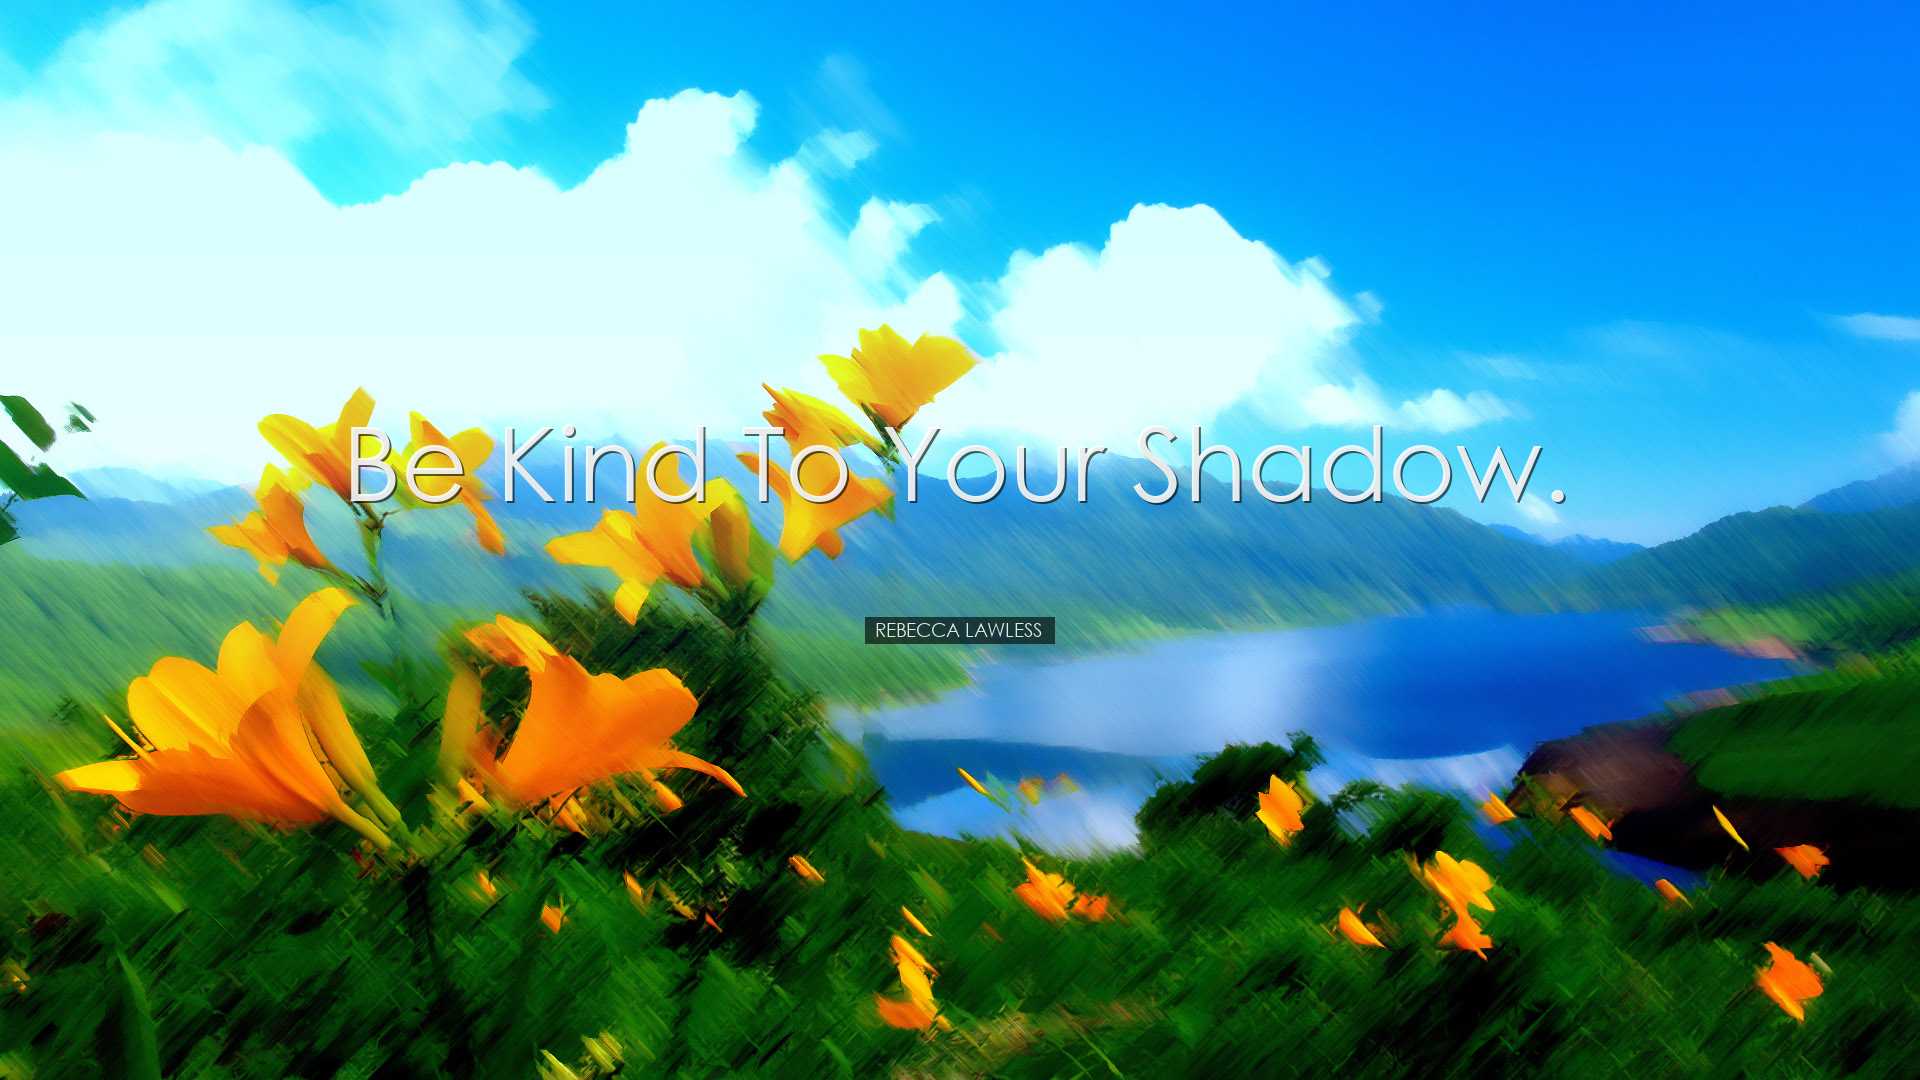 Be kind to your shadow. - Rebecca Lawless